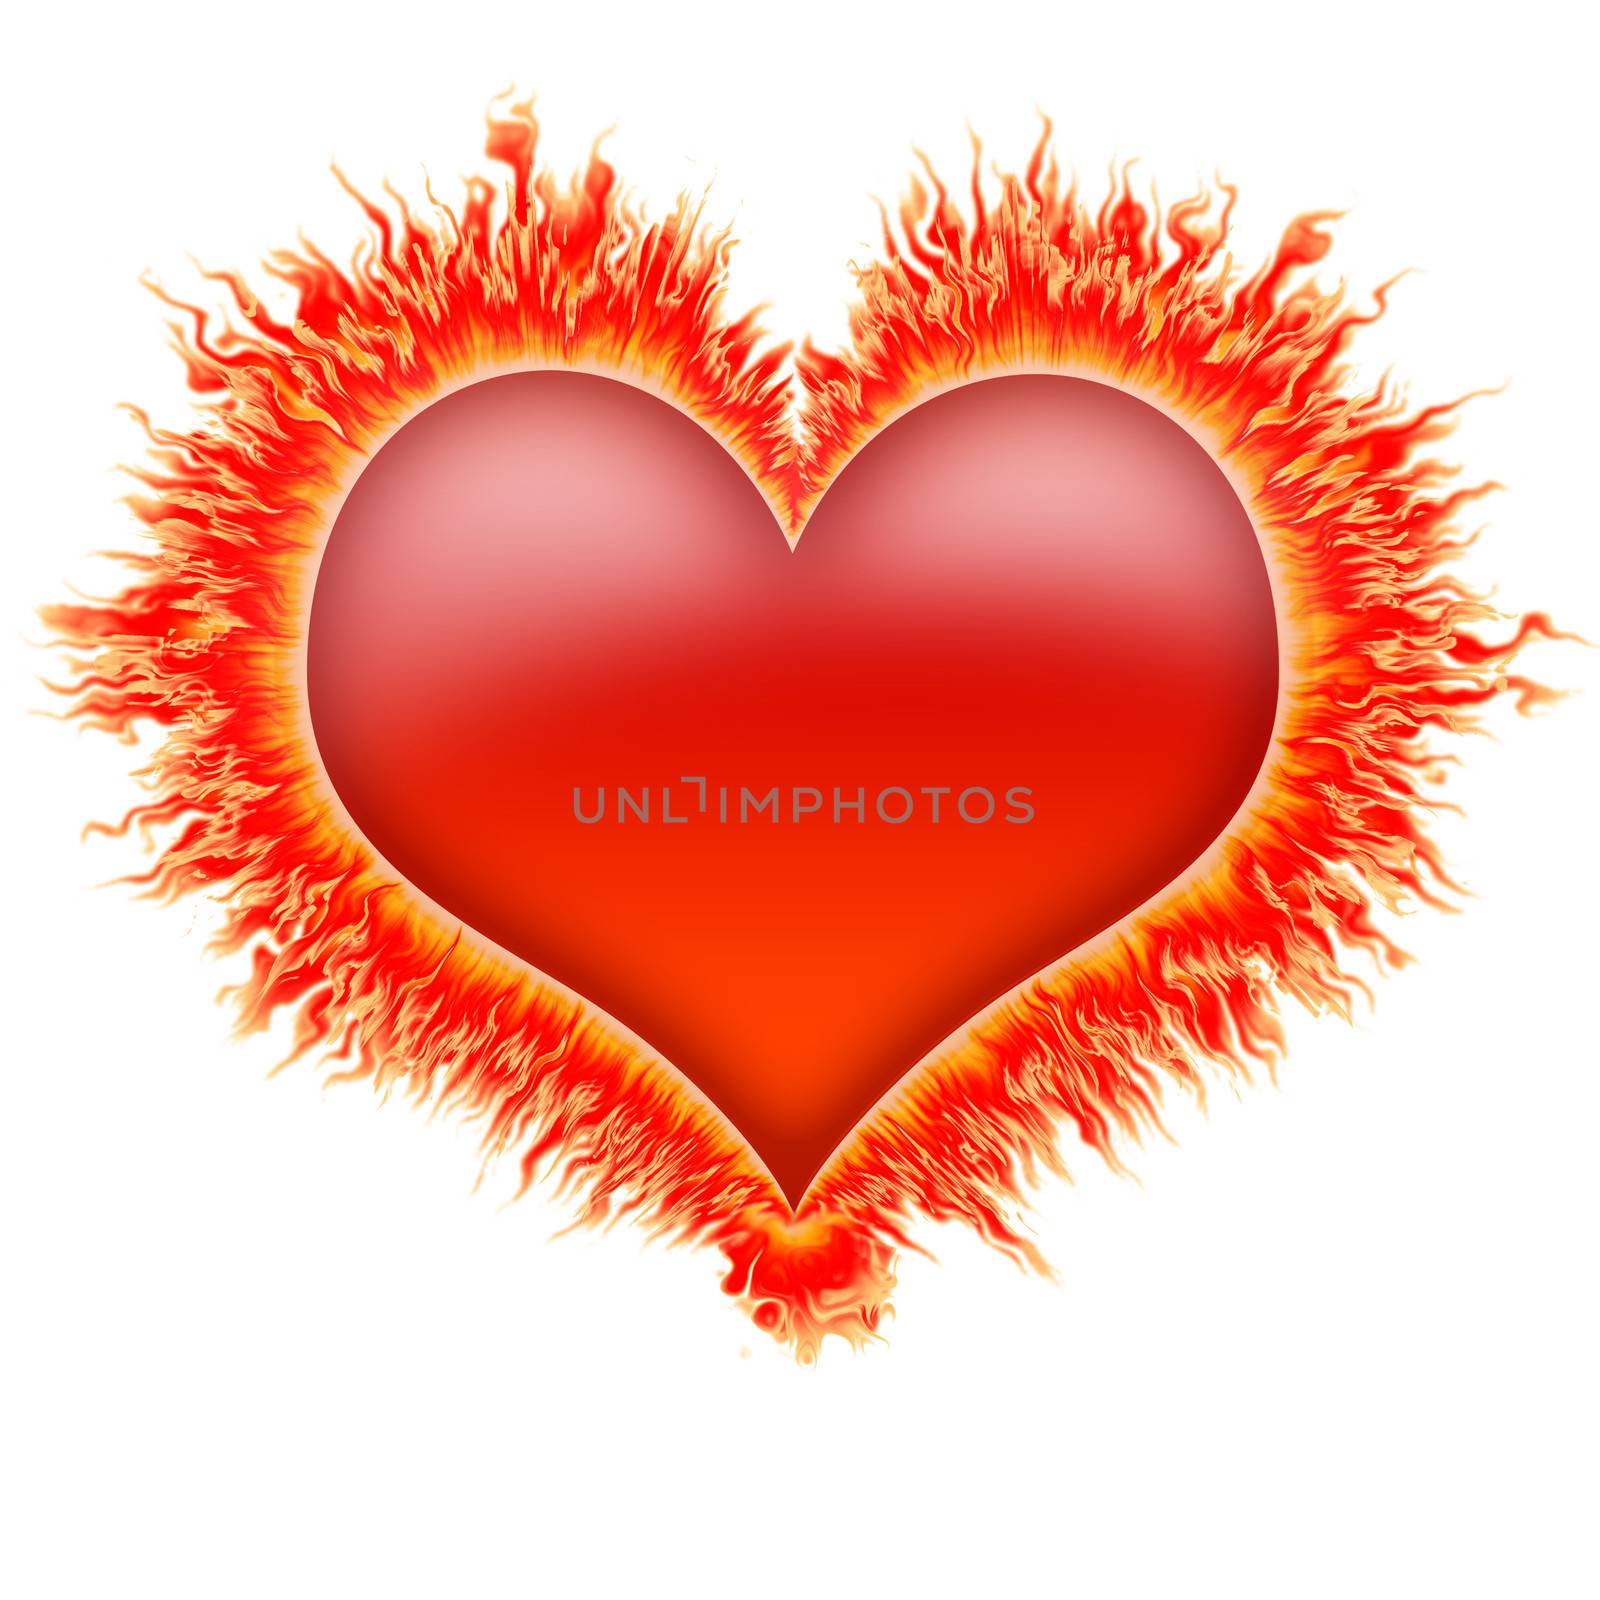 fire heart in red, orange and yellow flames
